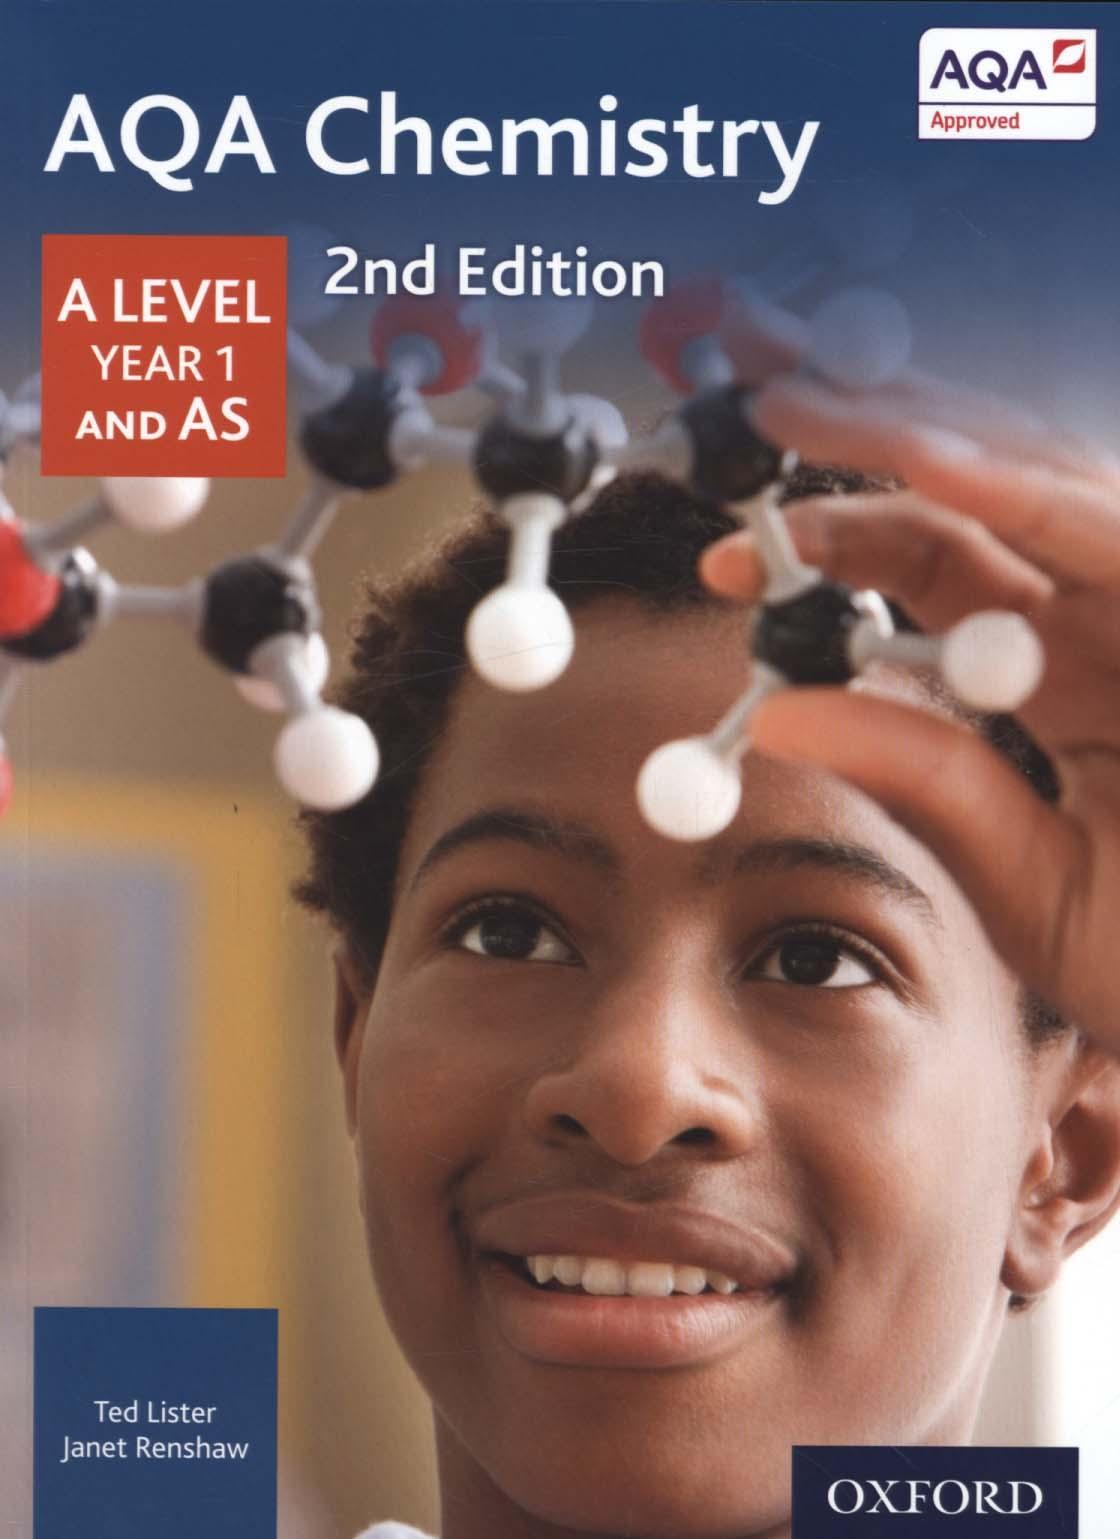 AQA Chemistry A Level Year 1 Student Book